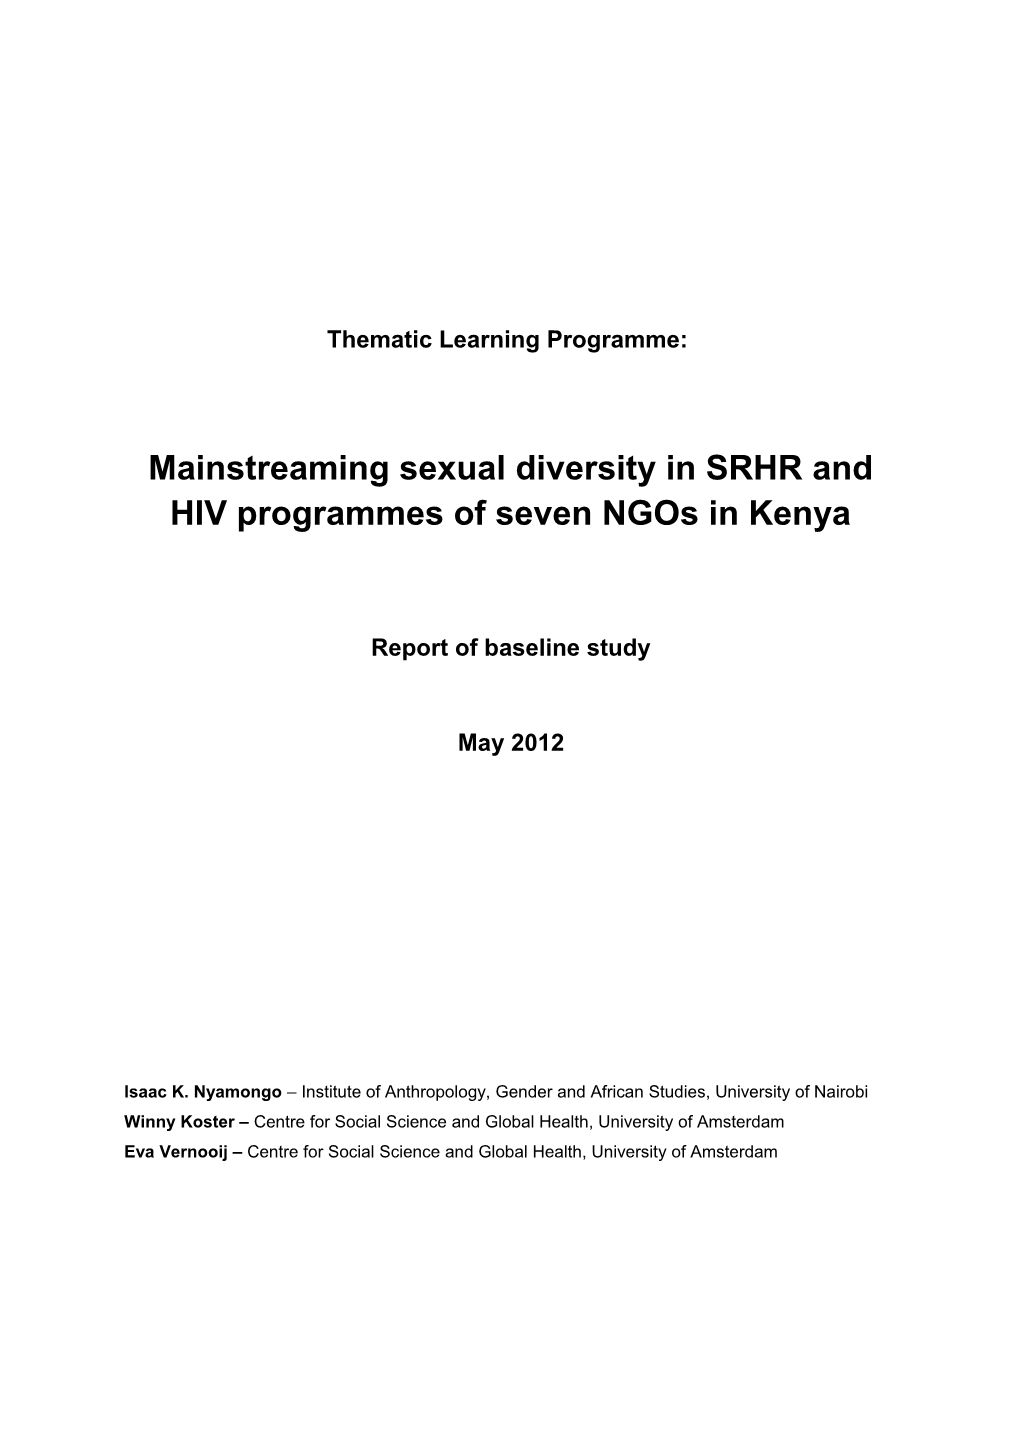 Mainstreaming Sexual Diversity in SRHR and HIV Programmes